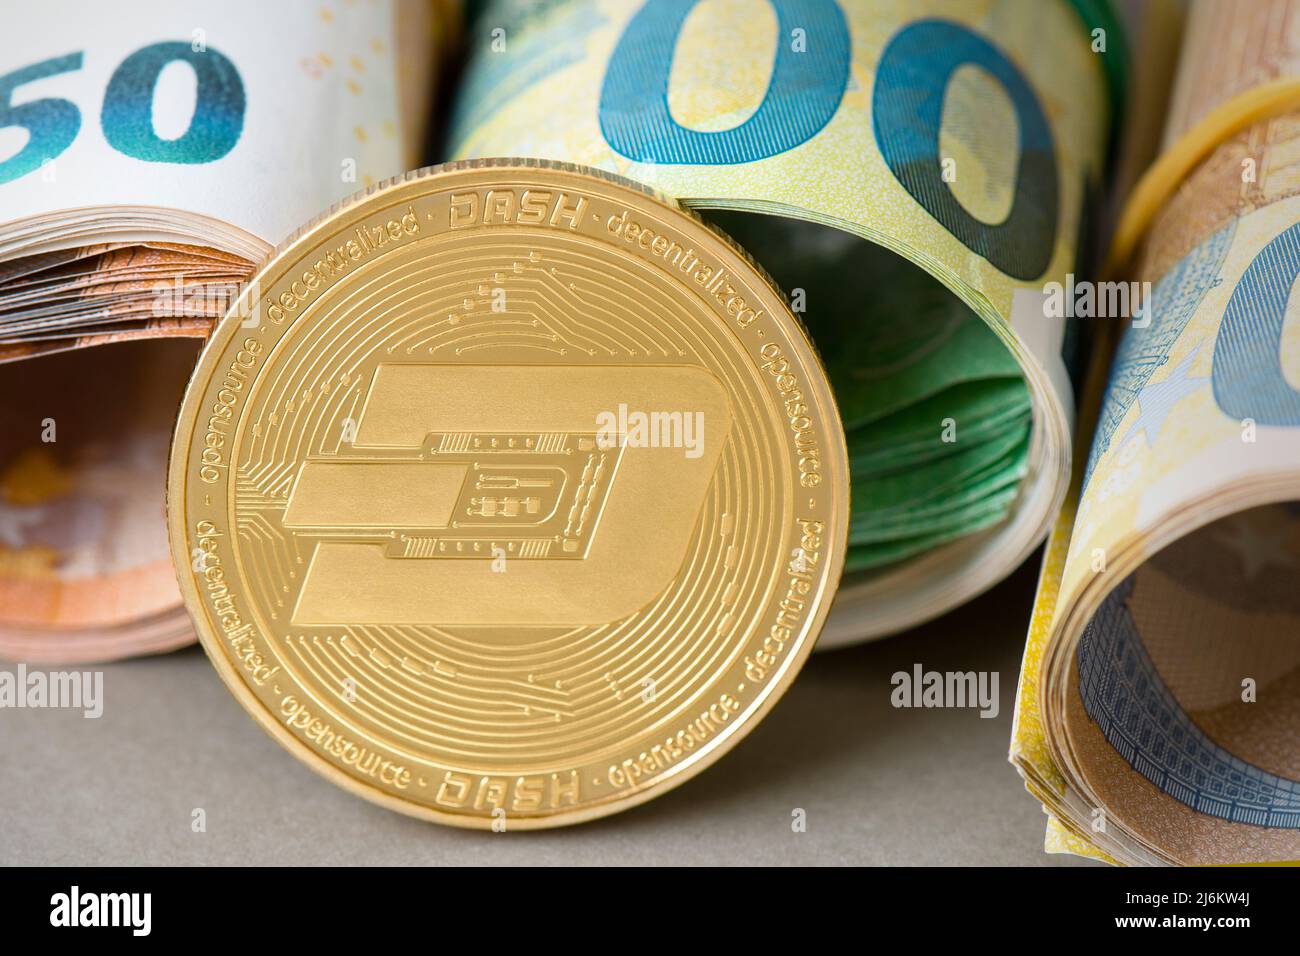 Cryptocurrency Dash golden coin on the background of rolled euro bills. Currency exchange for e-commerce, saving money, transfers concept. Financial Stock Photo